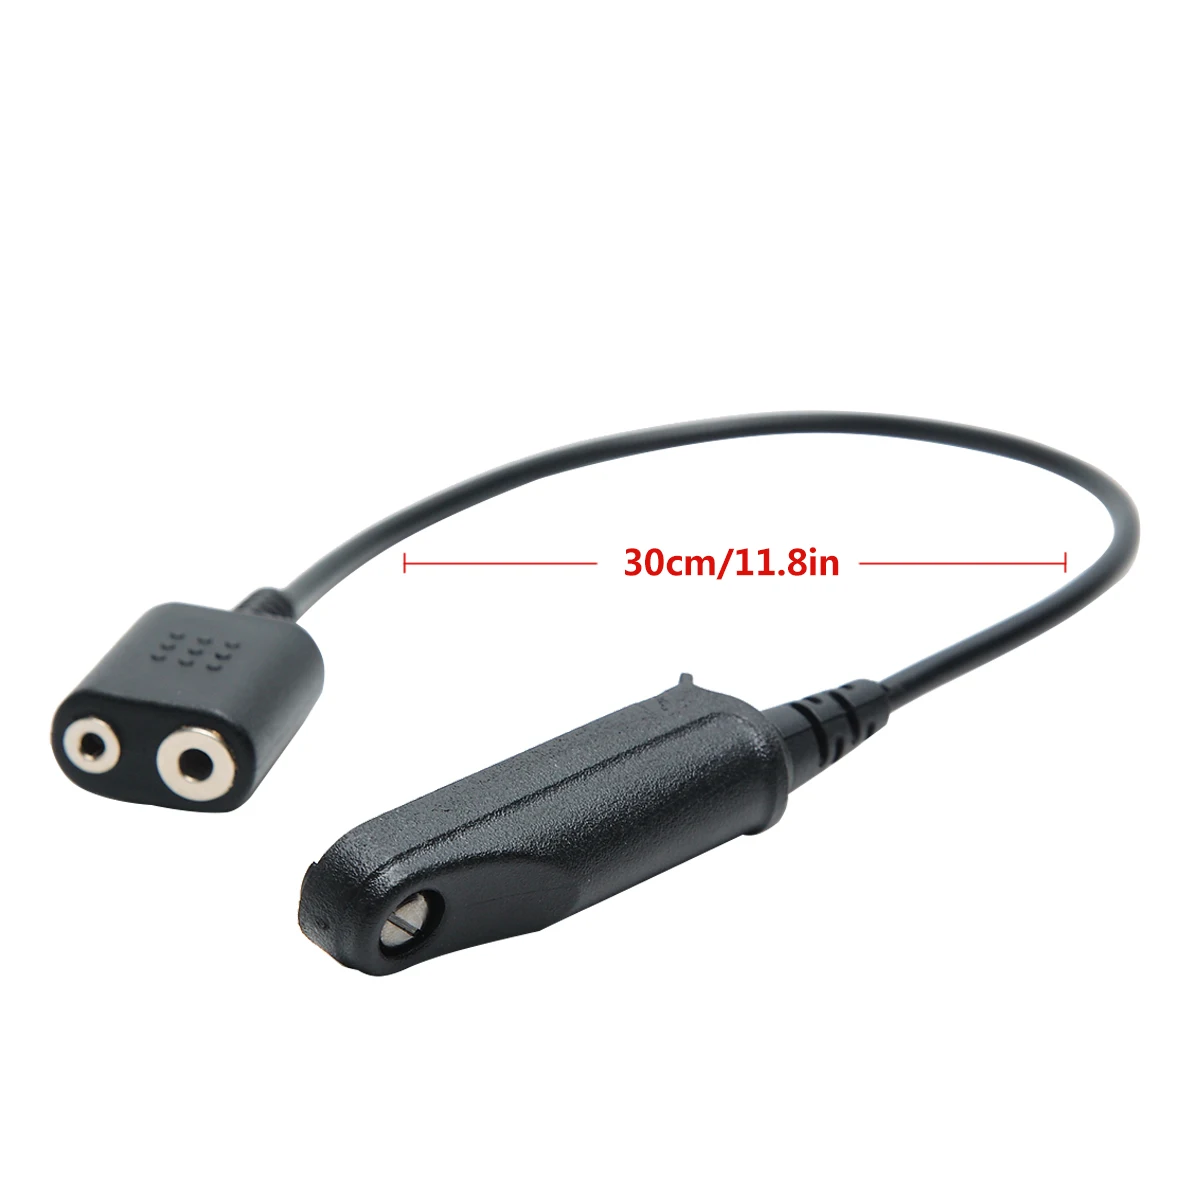 Adapter cable baofeng uv 9r plus waterproof radio to 2 pin headset speaker mic for uv thumb200